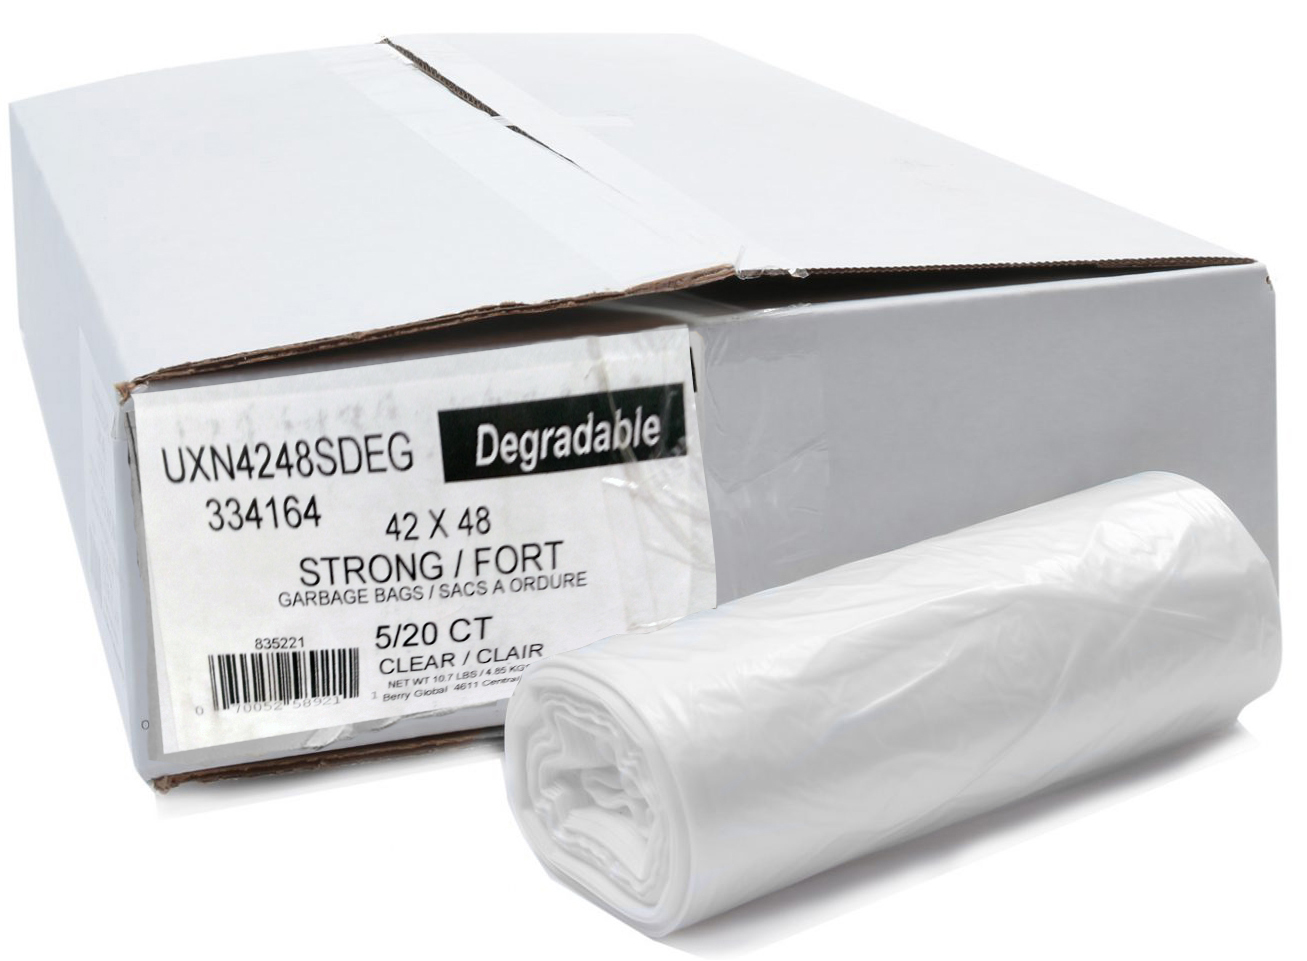 42x48 Berry Group® Degradeable Garbage Bags, Clear, Strong, 1.1 mil